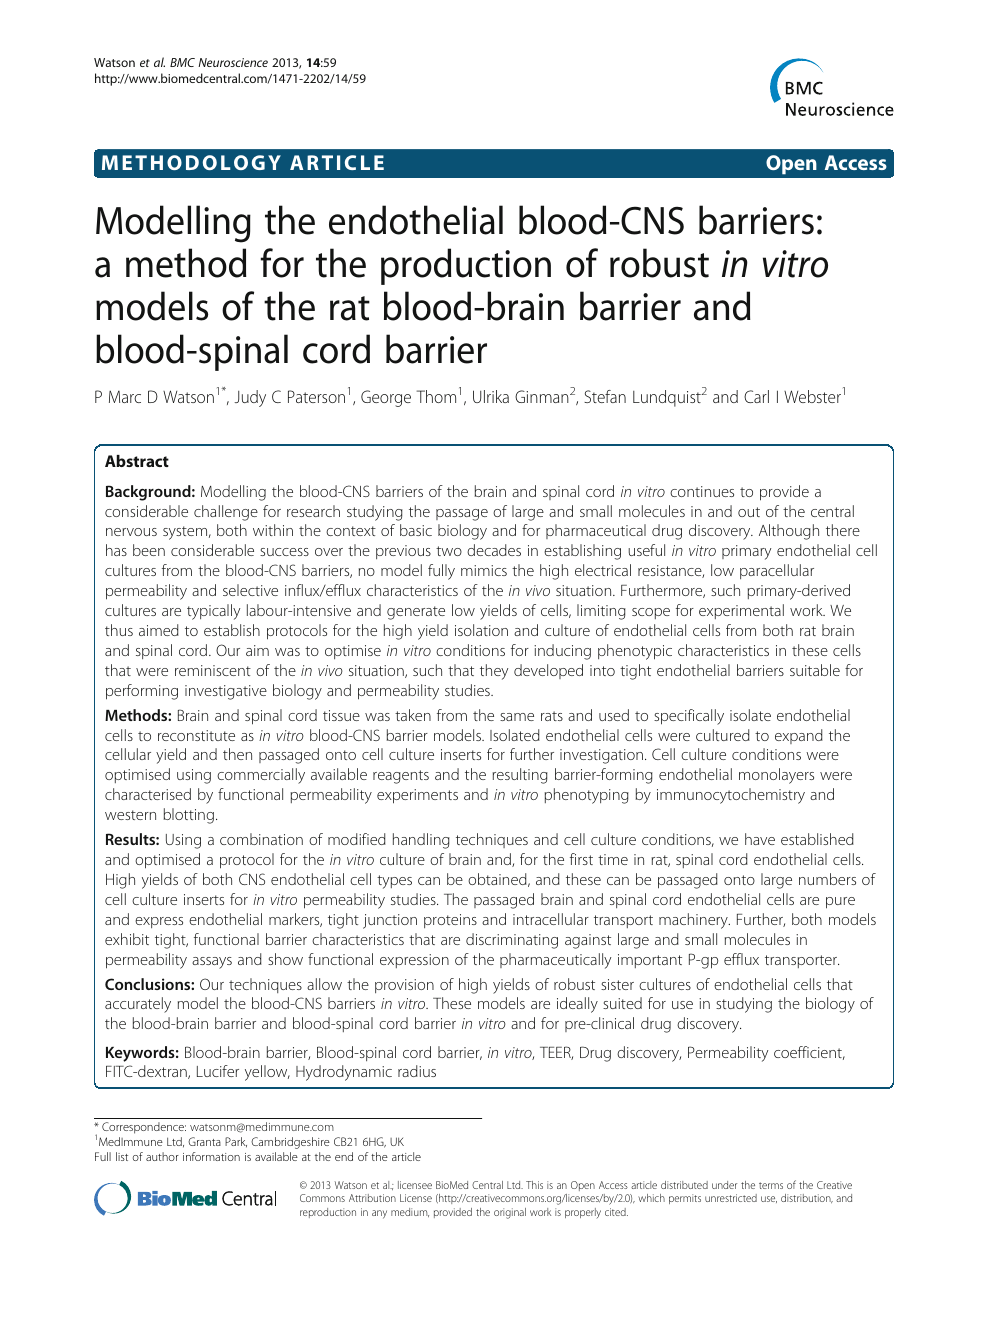 Modelling The Endothelial Blood Cns Barriers A Method For The Production Of Robust In Vitro Models Of The Rat Blood Brain Barrier And Blood Spinal Cord Barrier Topic Of Research Paper In Biological Sciences